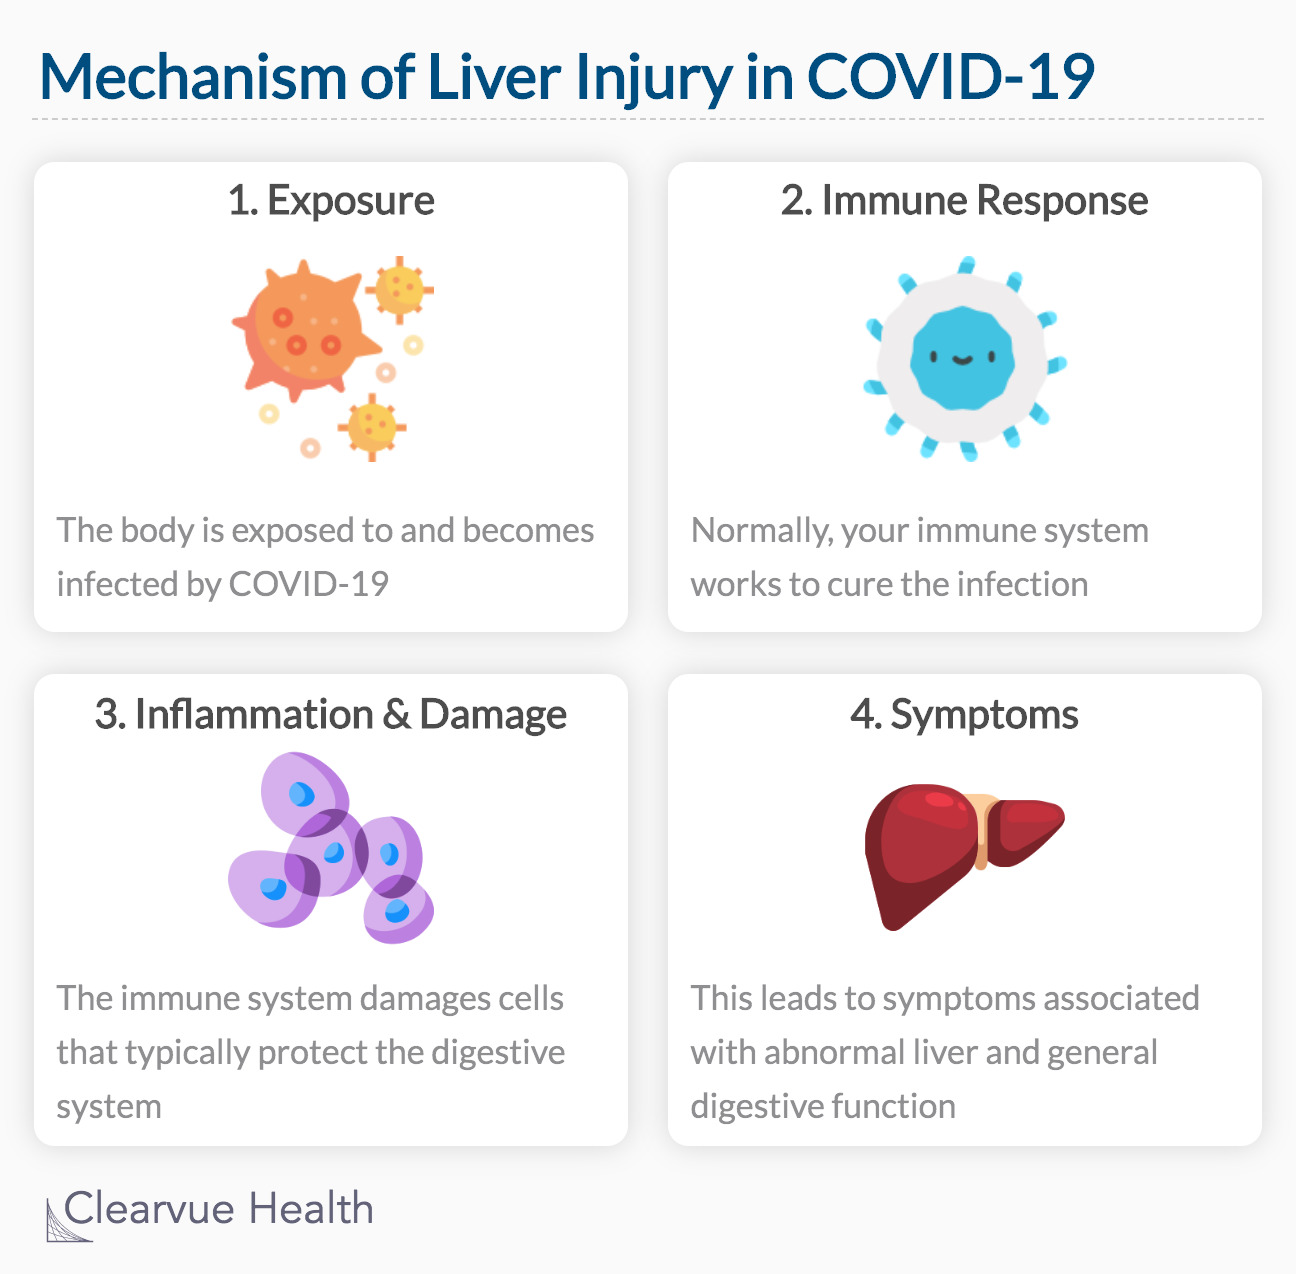 Mechanism of Liver Injury in COVID-19